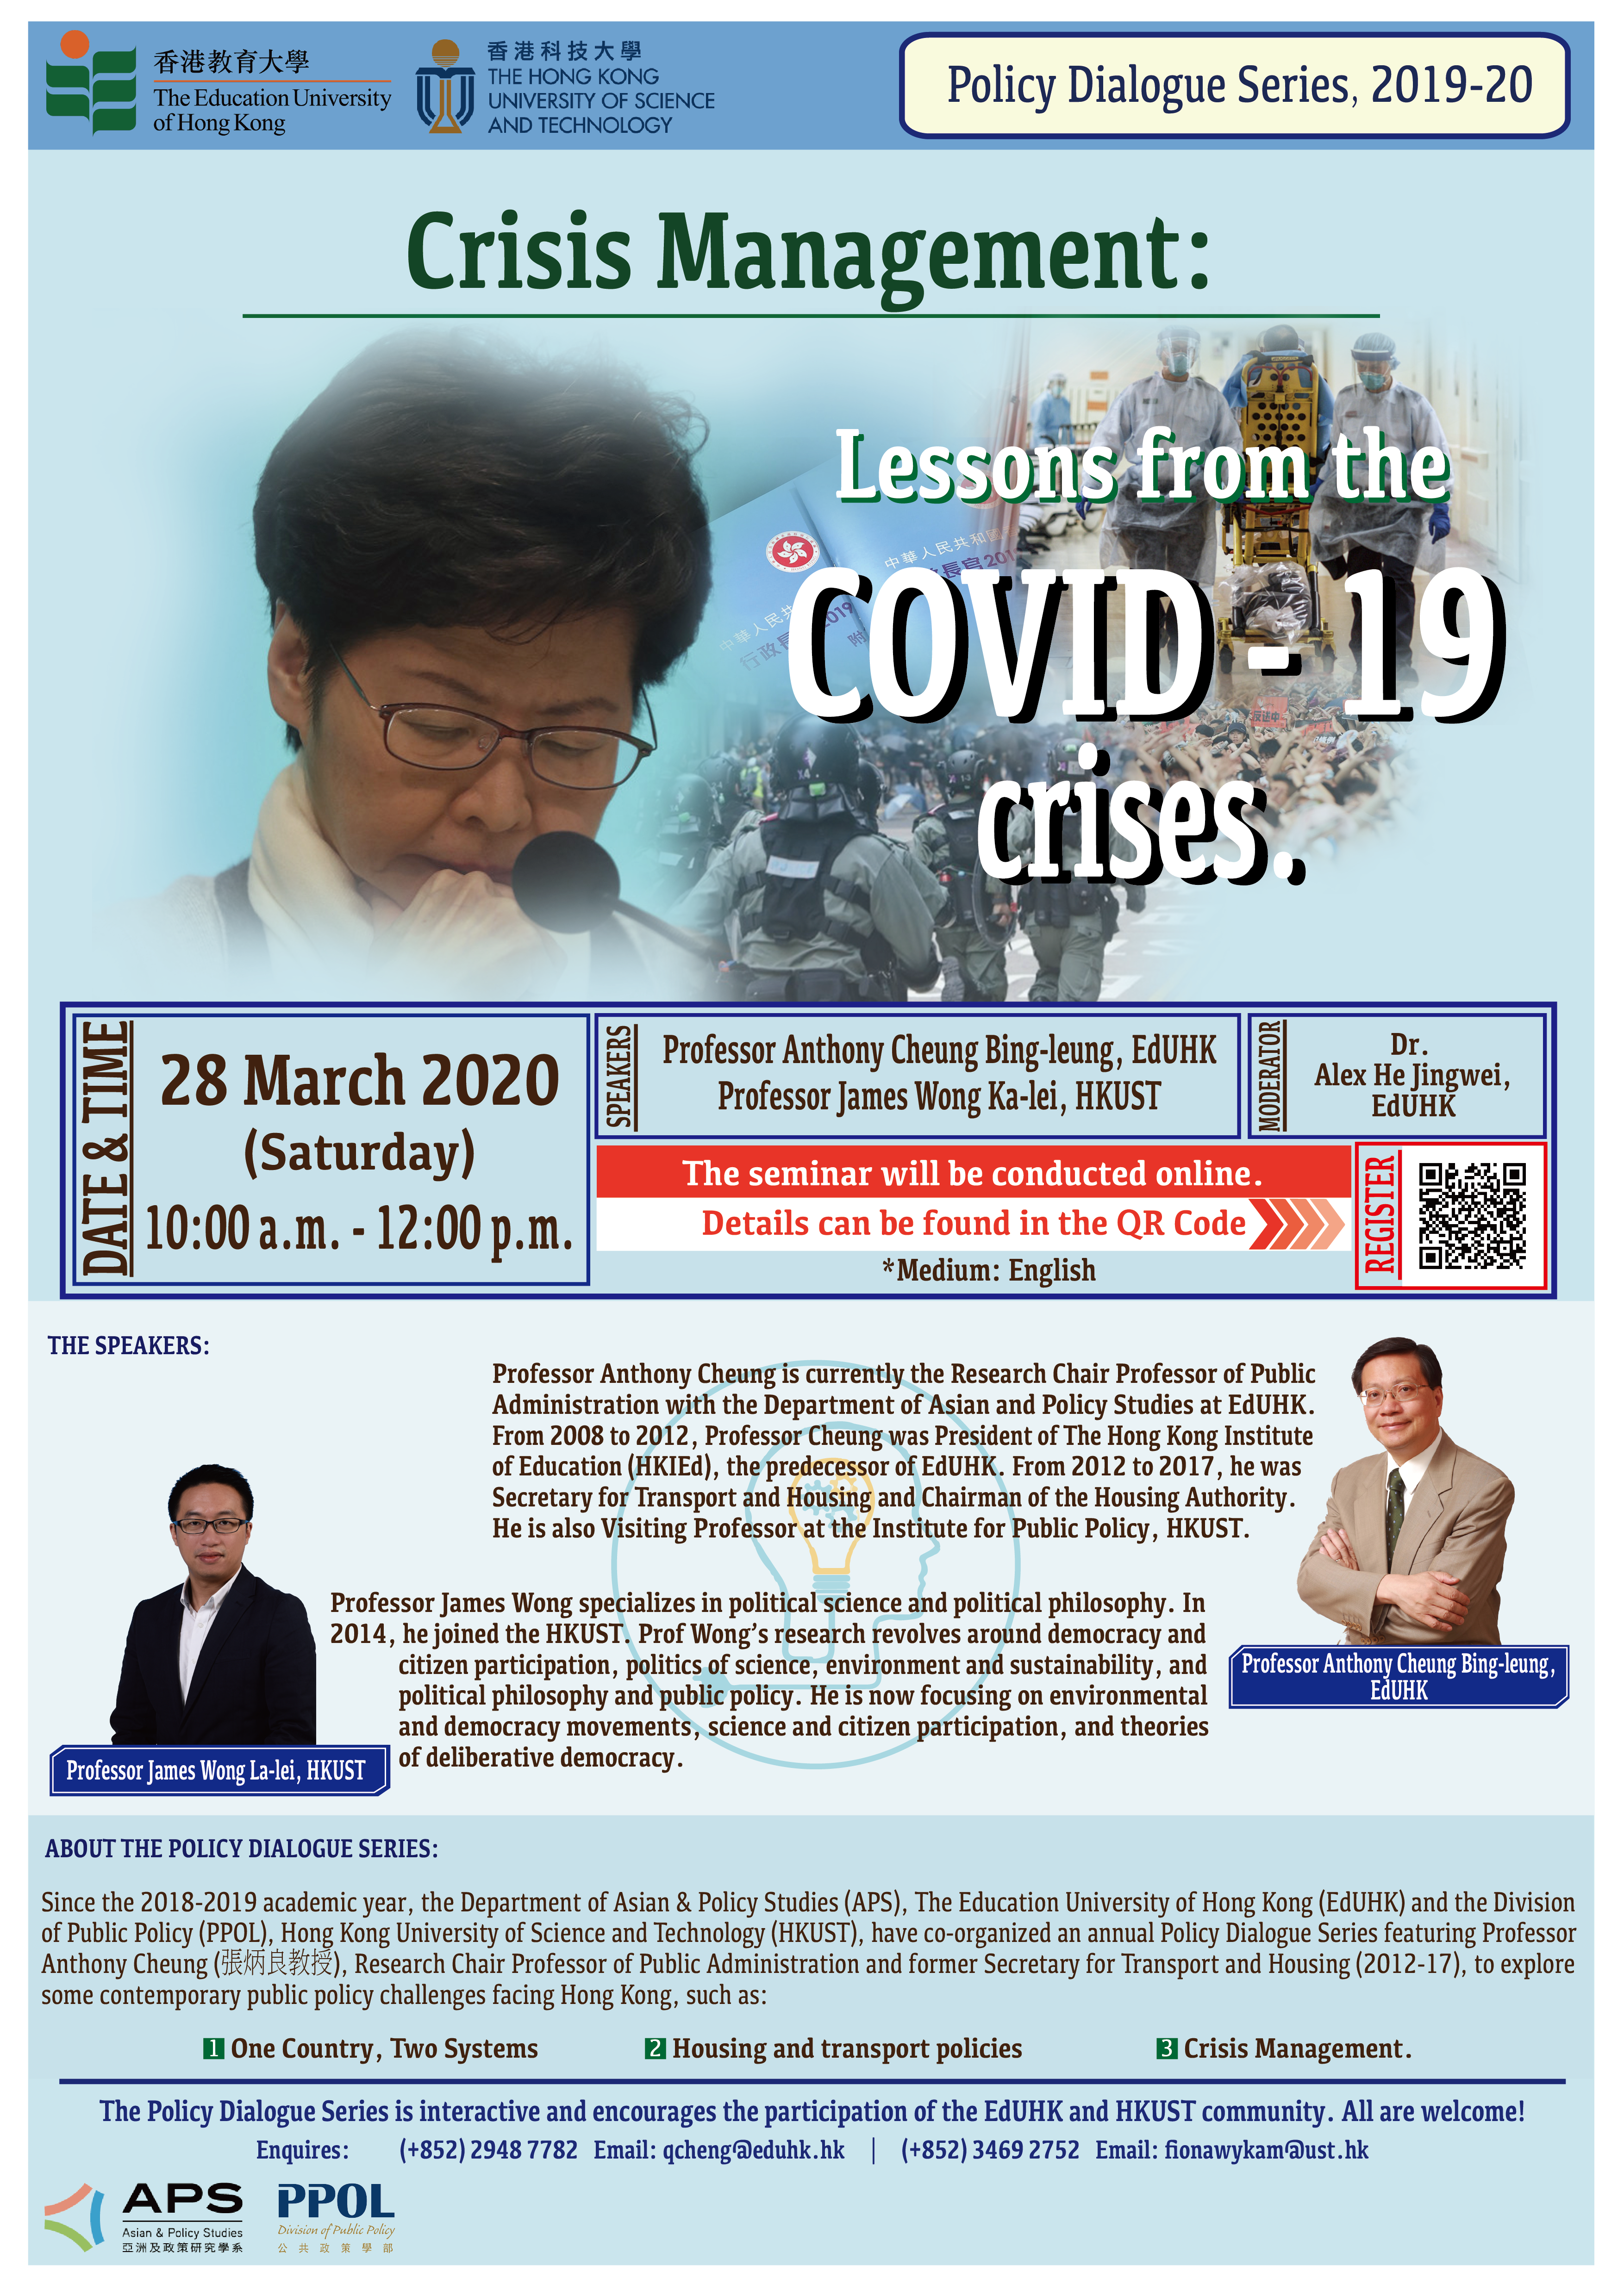 Crisis Management and Lessons from the COVID-19 crises